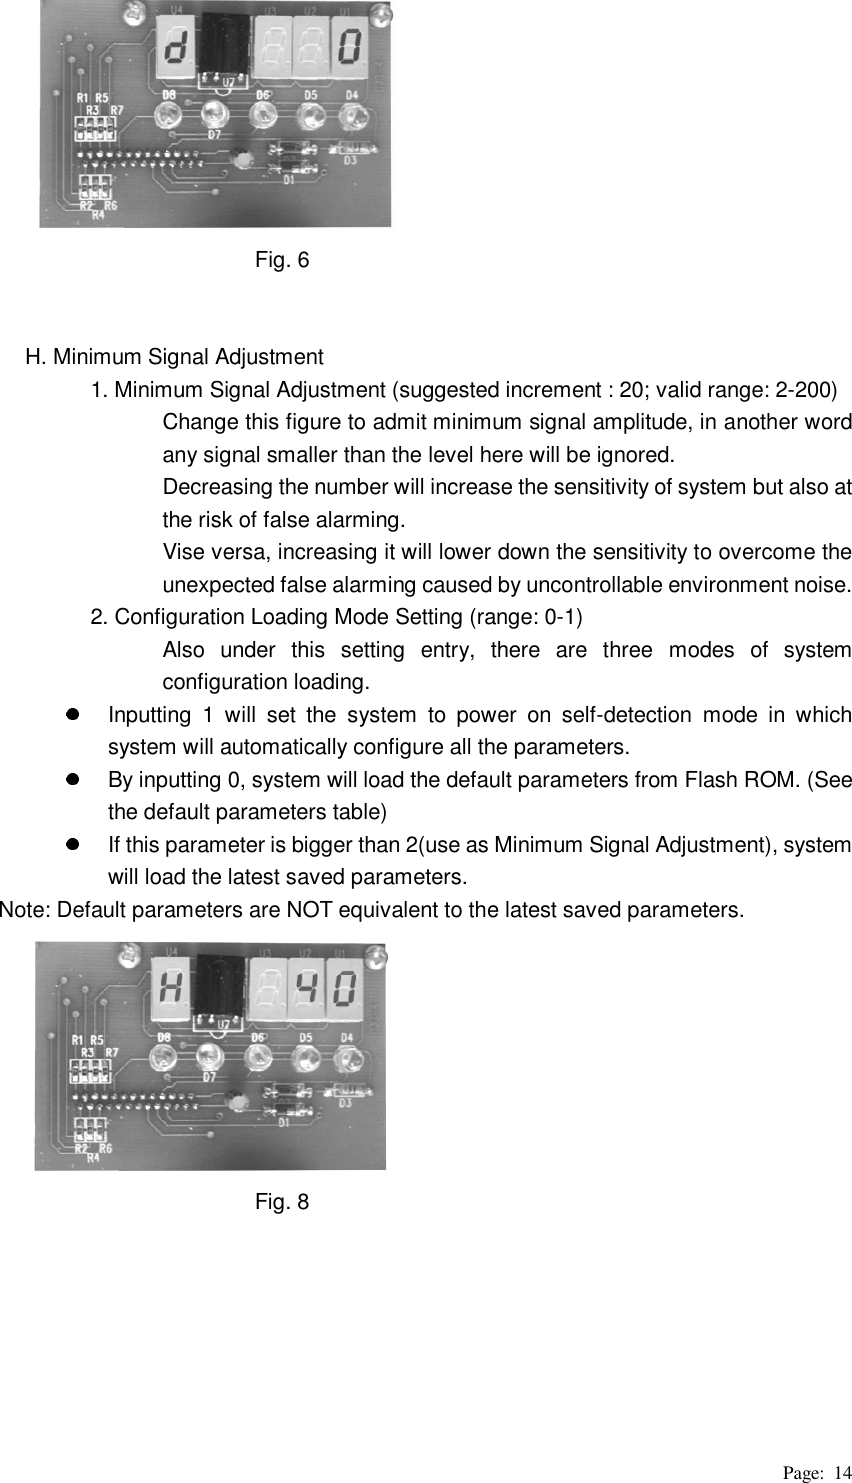 Page: 14                       Fig. 6   H. Minimum Signal Adjustment 1. Minimum Signal Adjustment (suggested increment : 20; valid range: 2-200) Change this figure to admit minimum signal amplitude, in another word any signal smaller than the level here will be ignored.   Decreasing the number will increase the sensitivity of system but also at the risk of false alarming.   Vise versa, increasing it will lower down the sensitivity to overcome the unexpected false alarming caused by uncontrollable environment noise. 2. Configuration Loading Mode Setting (range: 0-1) Also under this setting entry, there are three modes of system configuration loading.     Inputting 1 will set the system to power on self-detection mode in which system will automatically configure all the parameters.     By inputting 0, system will load the default parameters from Flash ROM. (See the default parameters table)   If this parameter is bigger than 2(use as Minimum Signal Adjustment), system will load the latest saved parameters.   Note: Default parameters are NOT equivalent to the latest saved parameters.                       Fig. 8       